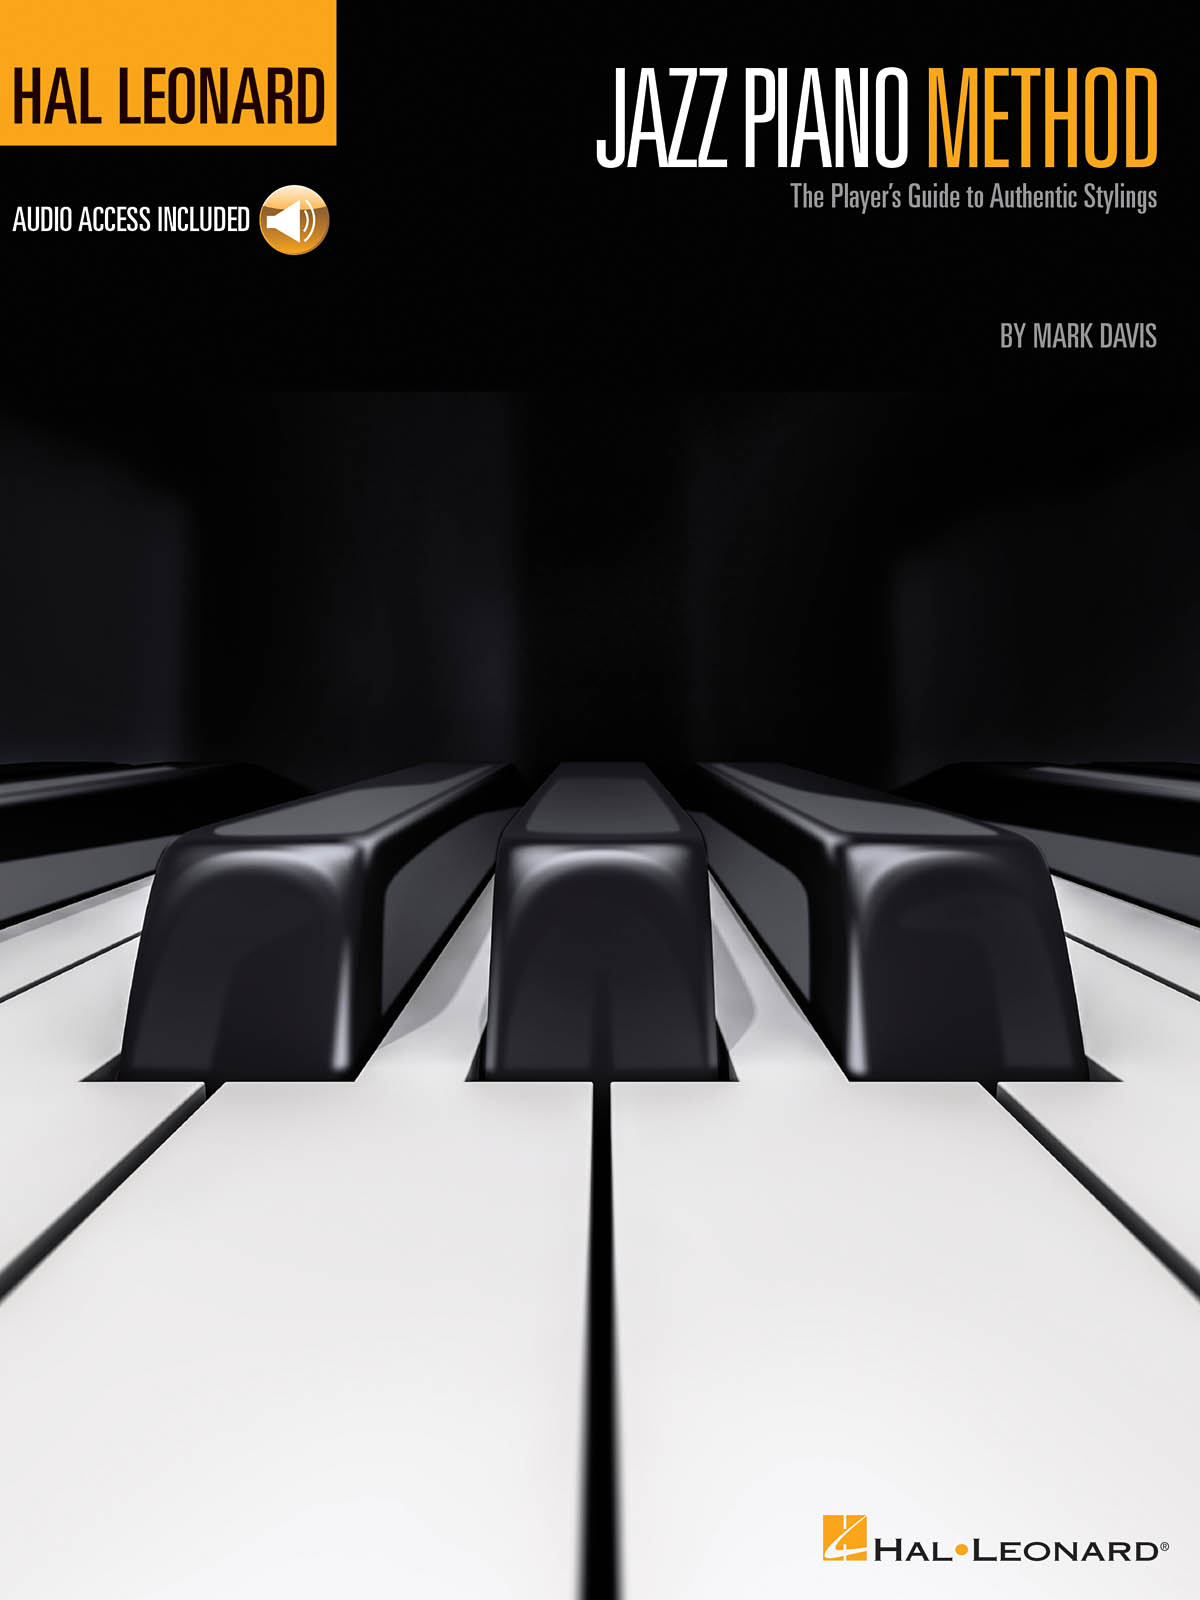 Hal Leonard Jazz Piano Method - The Player's Guide to Authentic Stylings - pro klavír